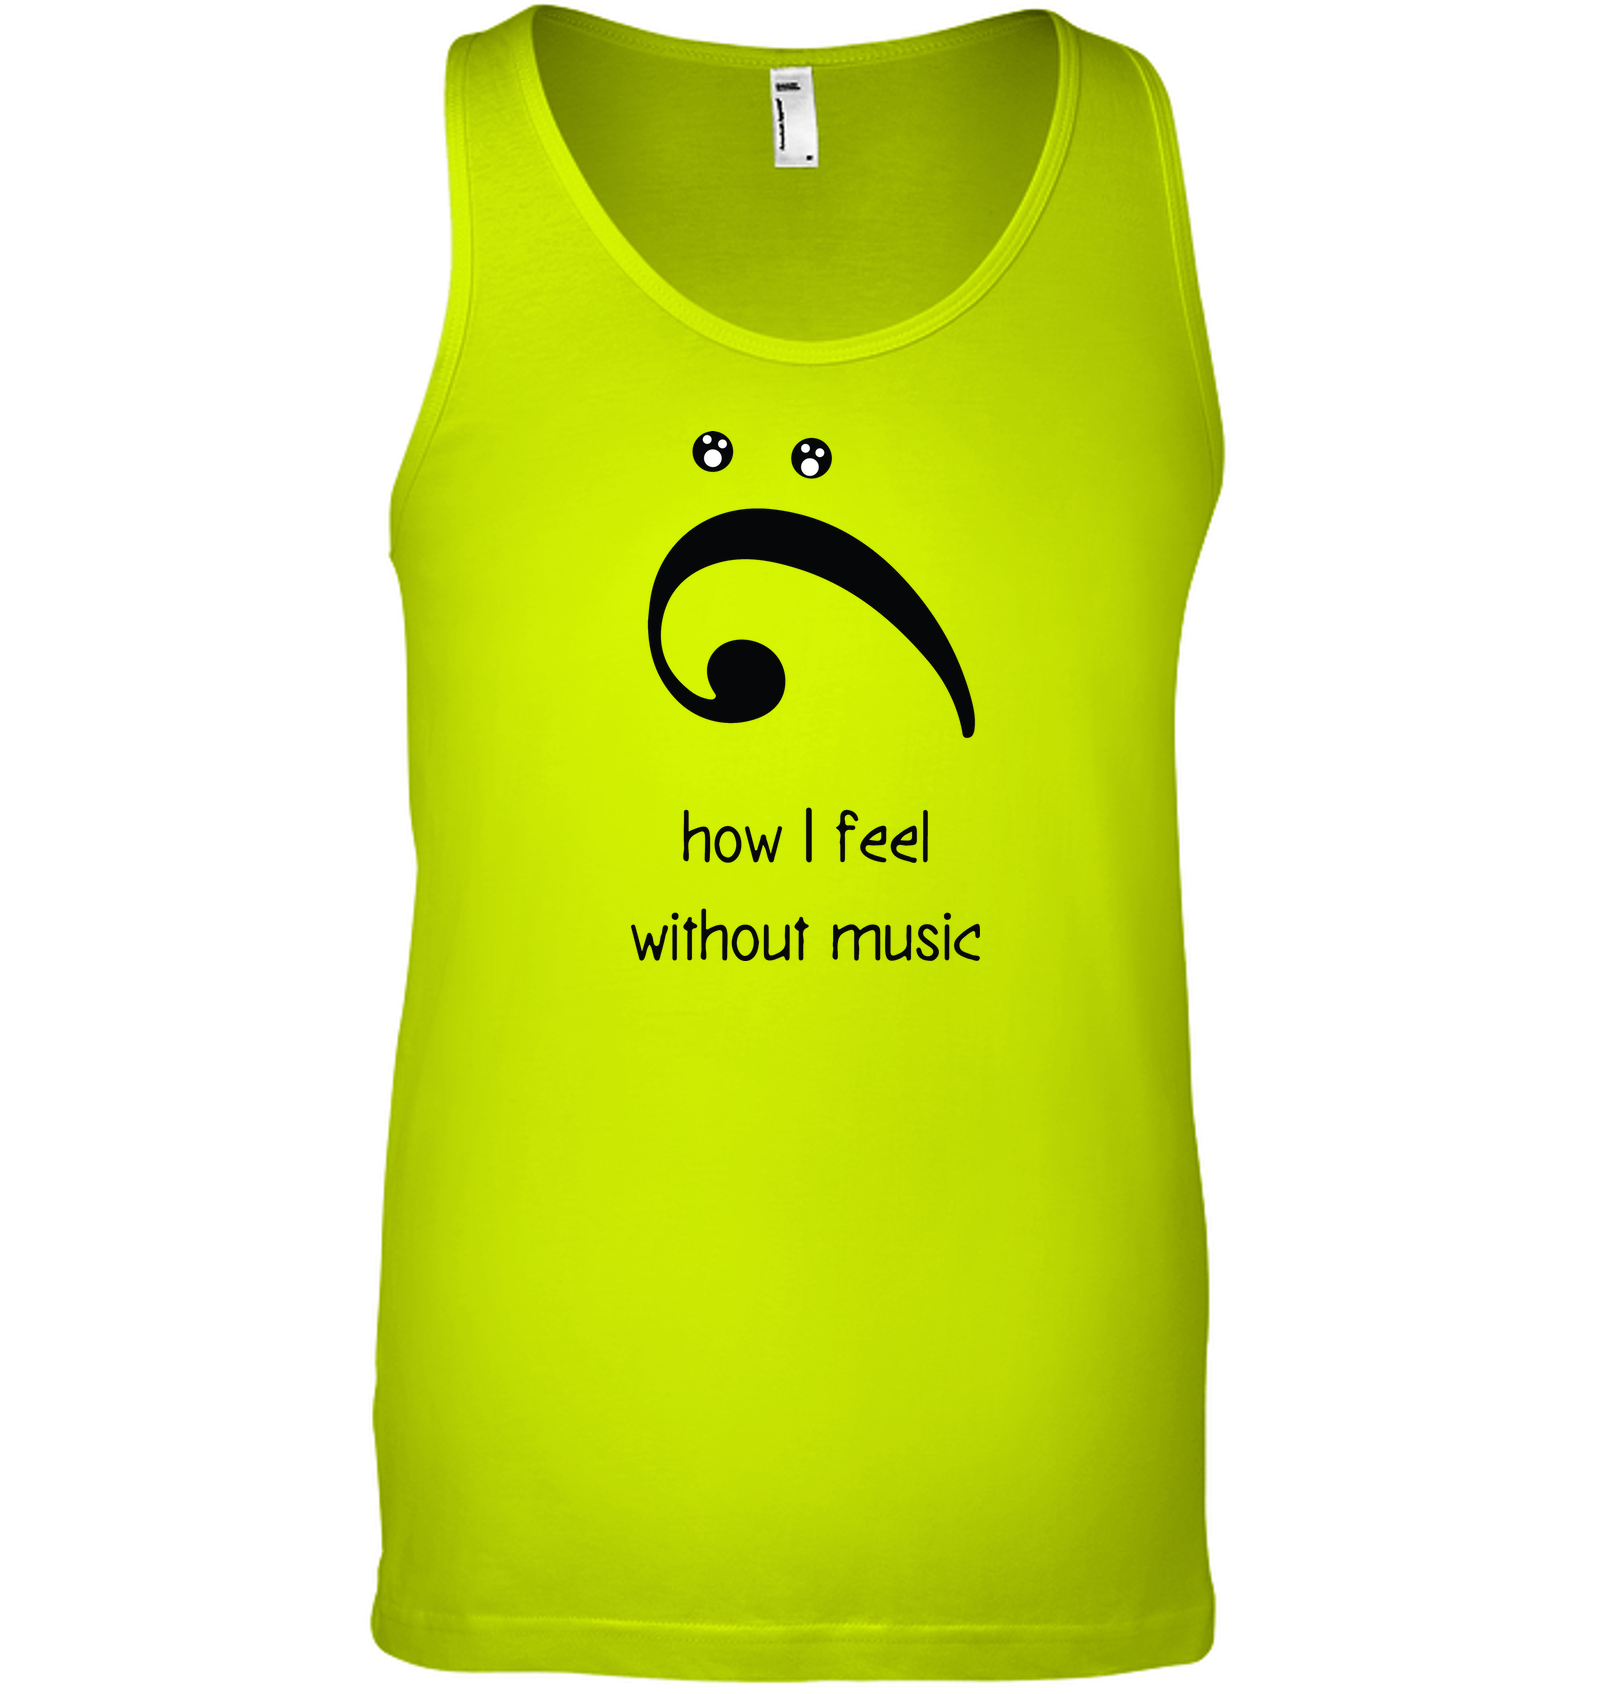 How I Feel Without Music - Bella + Canvas Unisex Jersey Tank